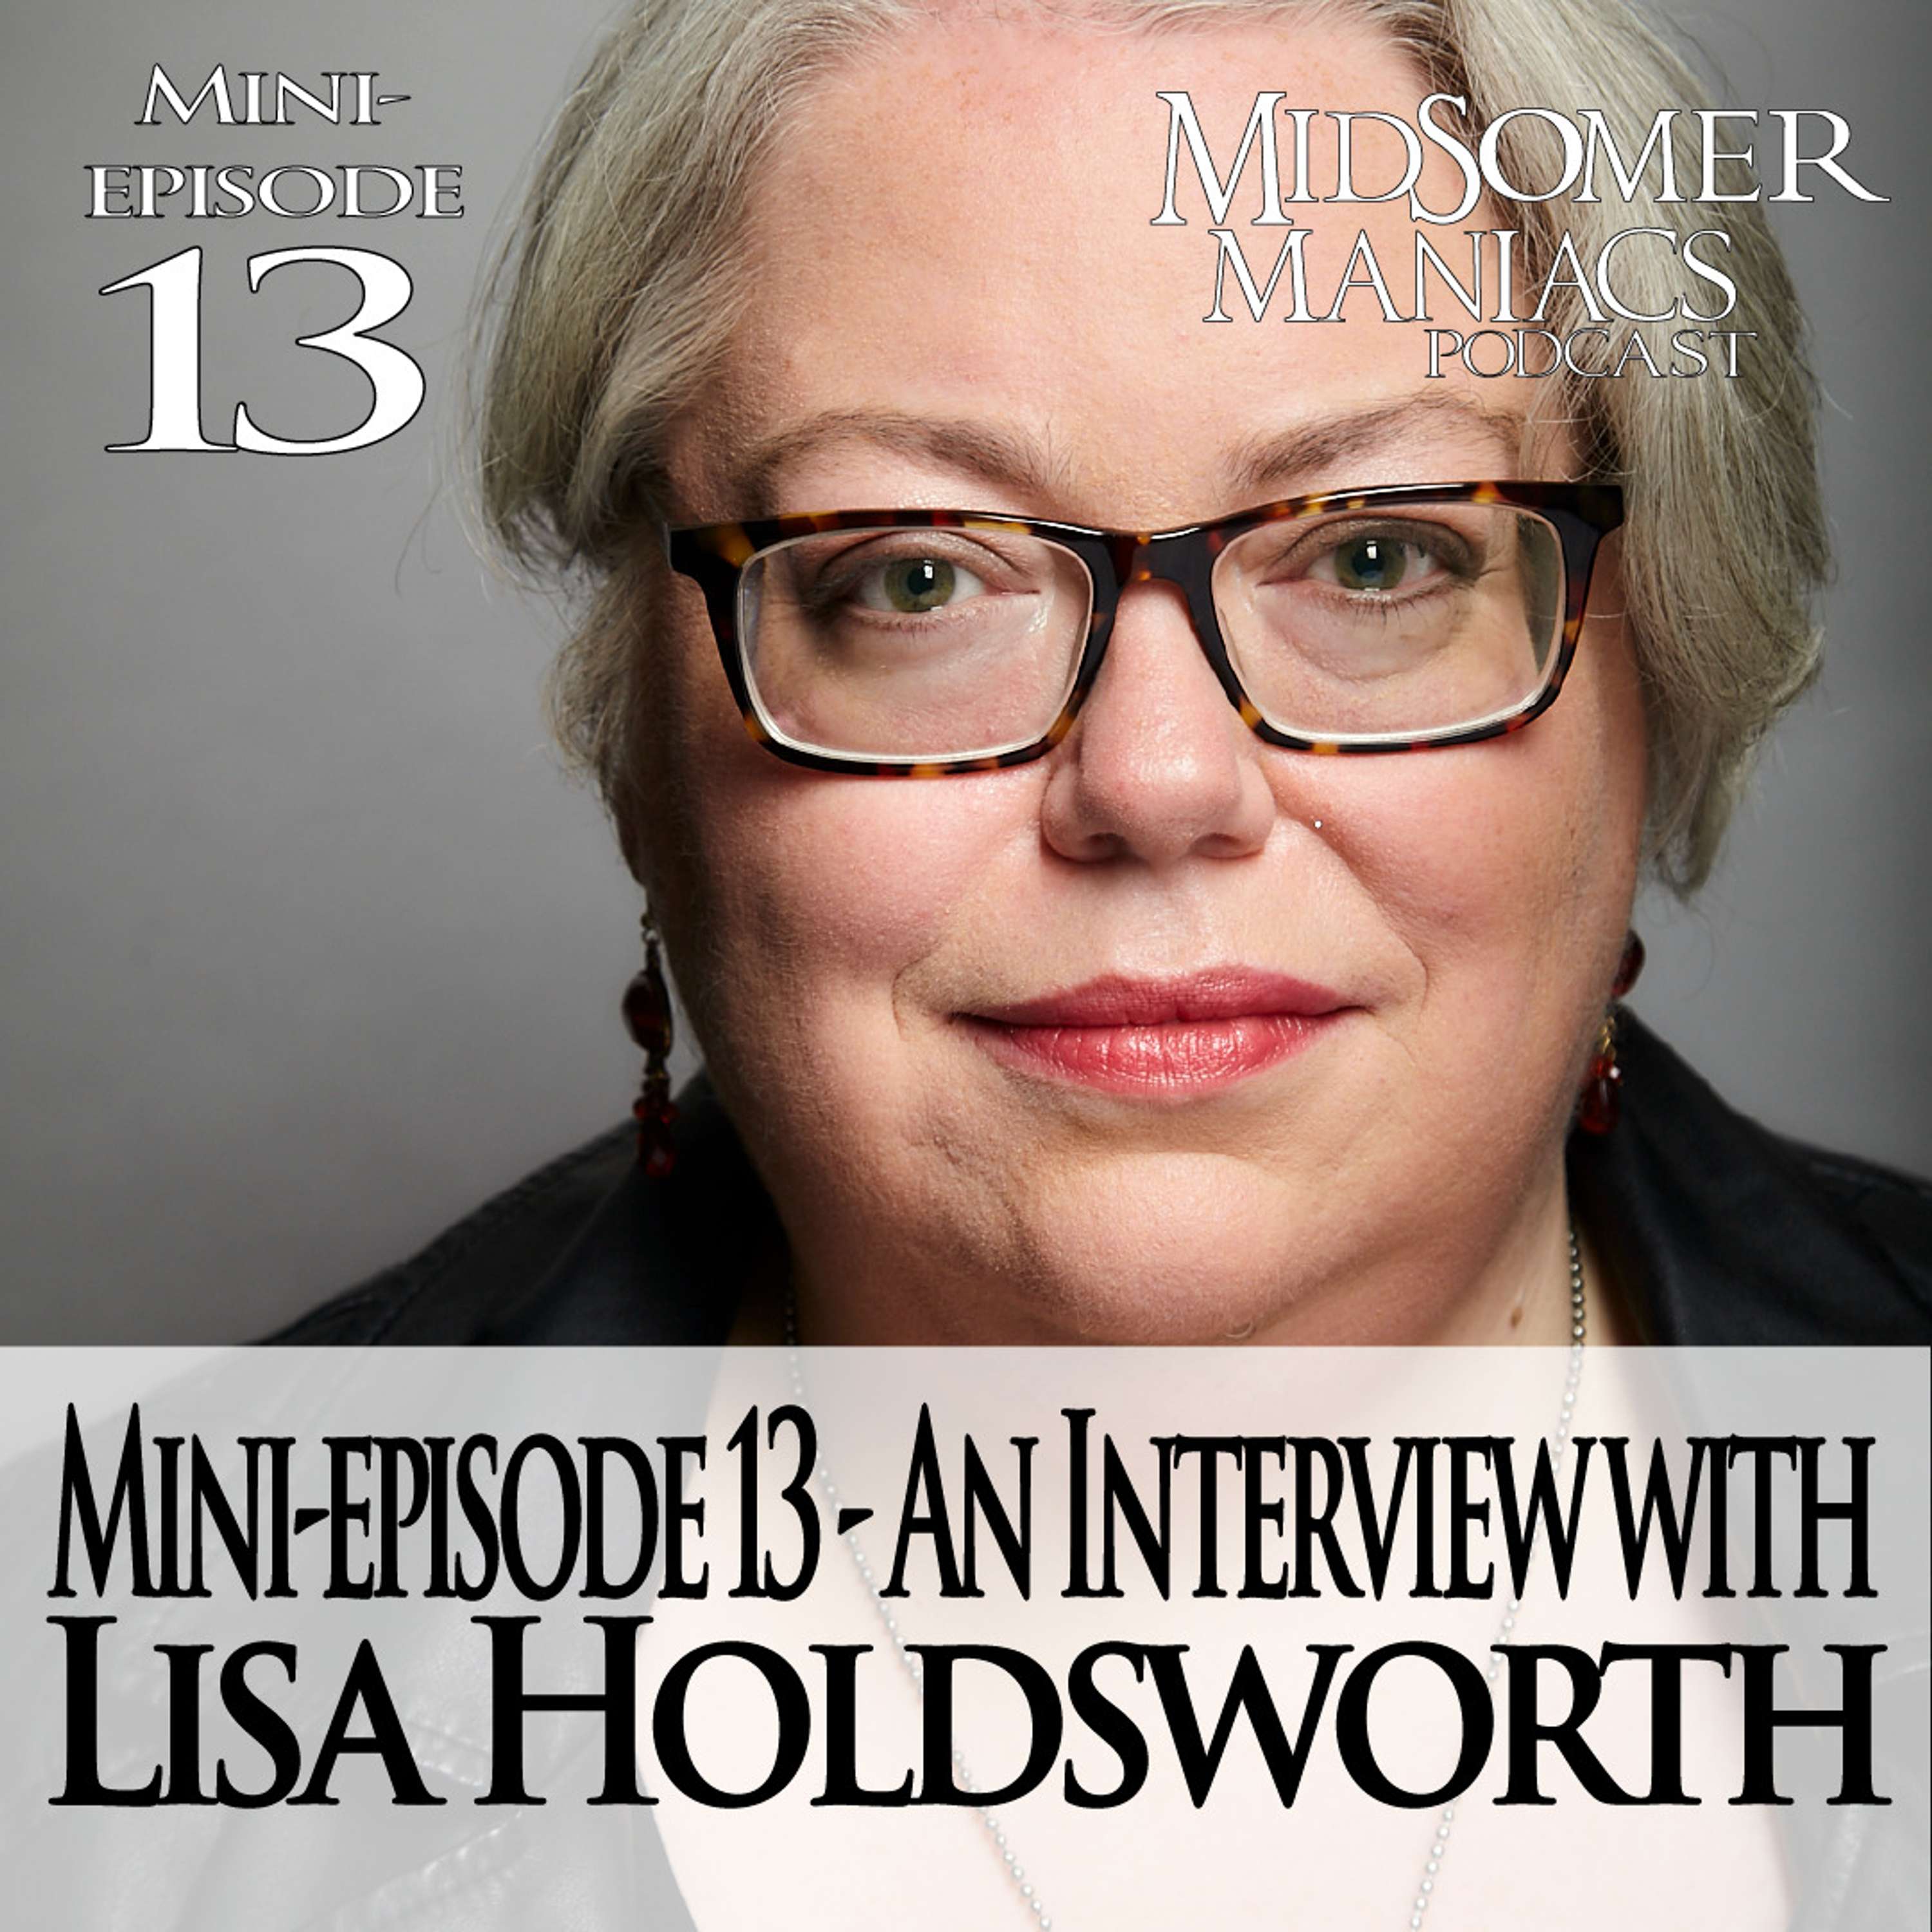 Mini-episode 13 - An Interview with Midsomer Screenwriter Lisa Holdsworth